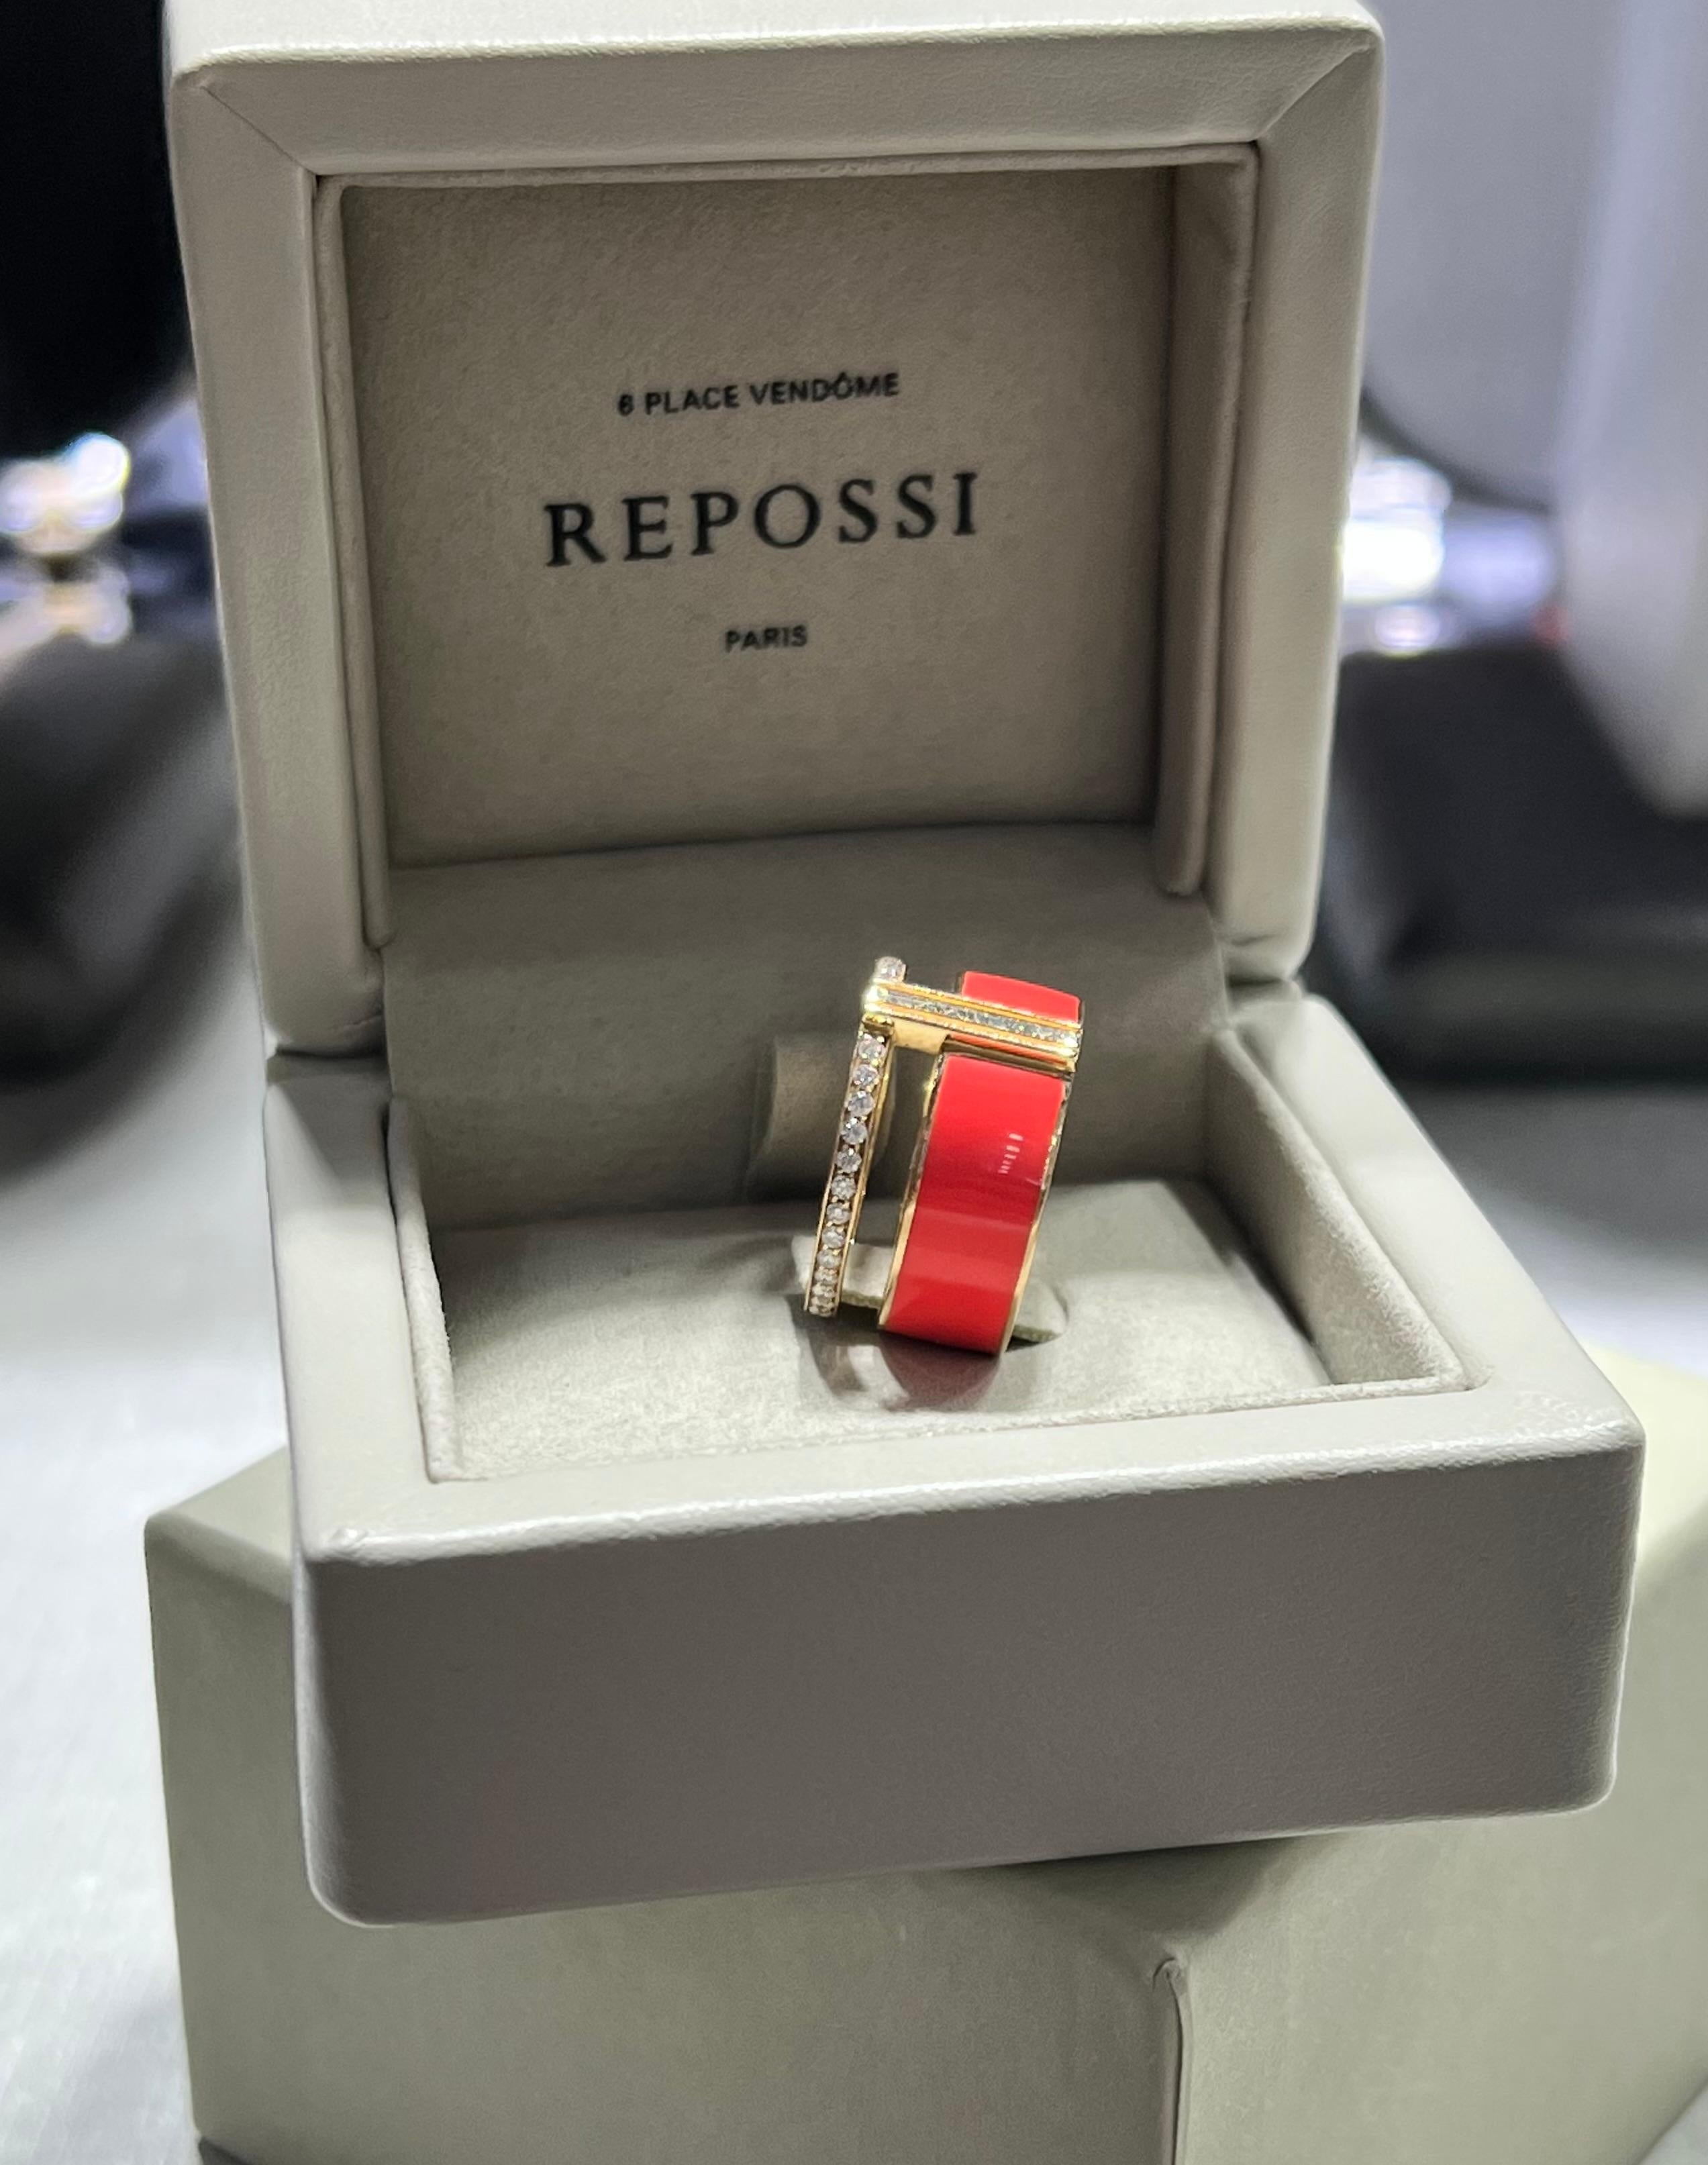 The Repossi jewelry house has reinvented its classic Berbere pieces to mark the 10th anniversary of the iconic collection. Exclusive creations were unveiled, all featuring the Maison’s signature elegance and avant-garde spirit. The ring for your